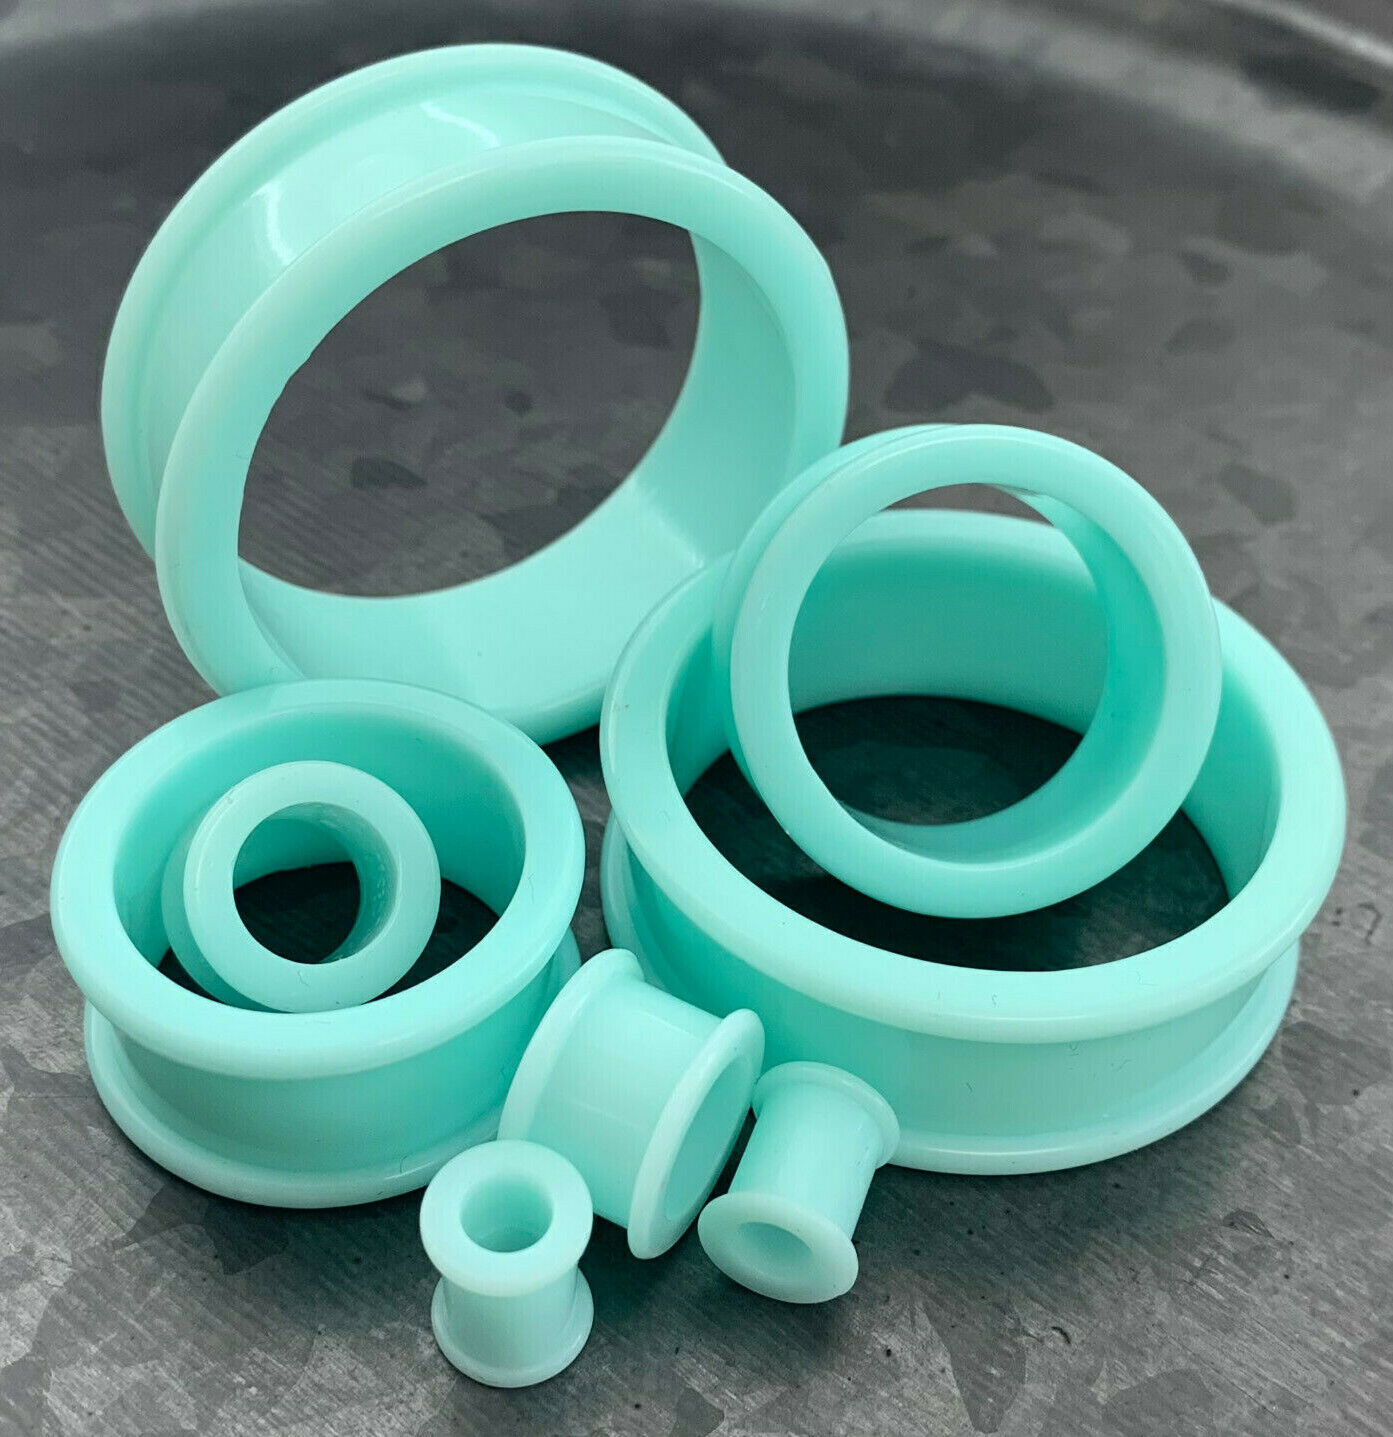 PAIR Teal Solid Silicone Tunnels Double Flare Plugs Earlets Gauges up to 2 inch